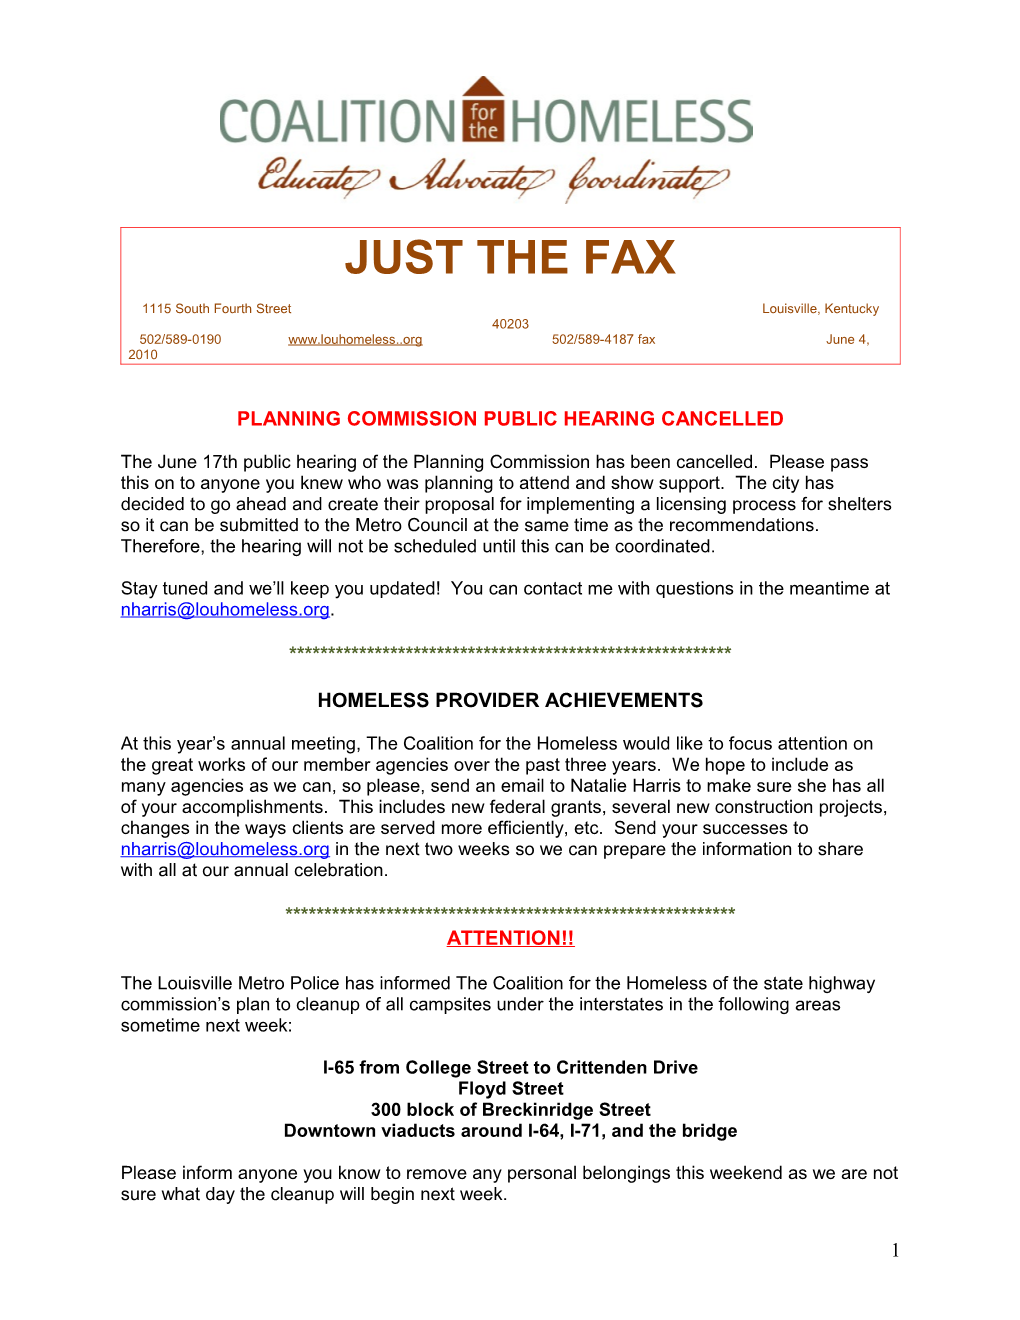 Just the Fax Newsletter